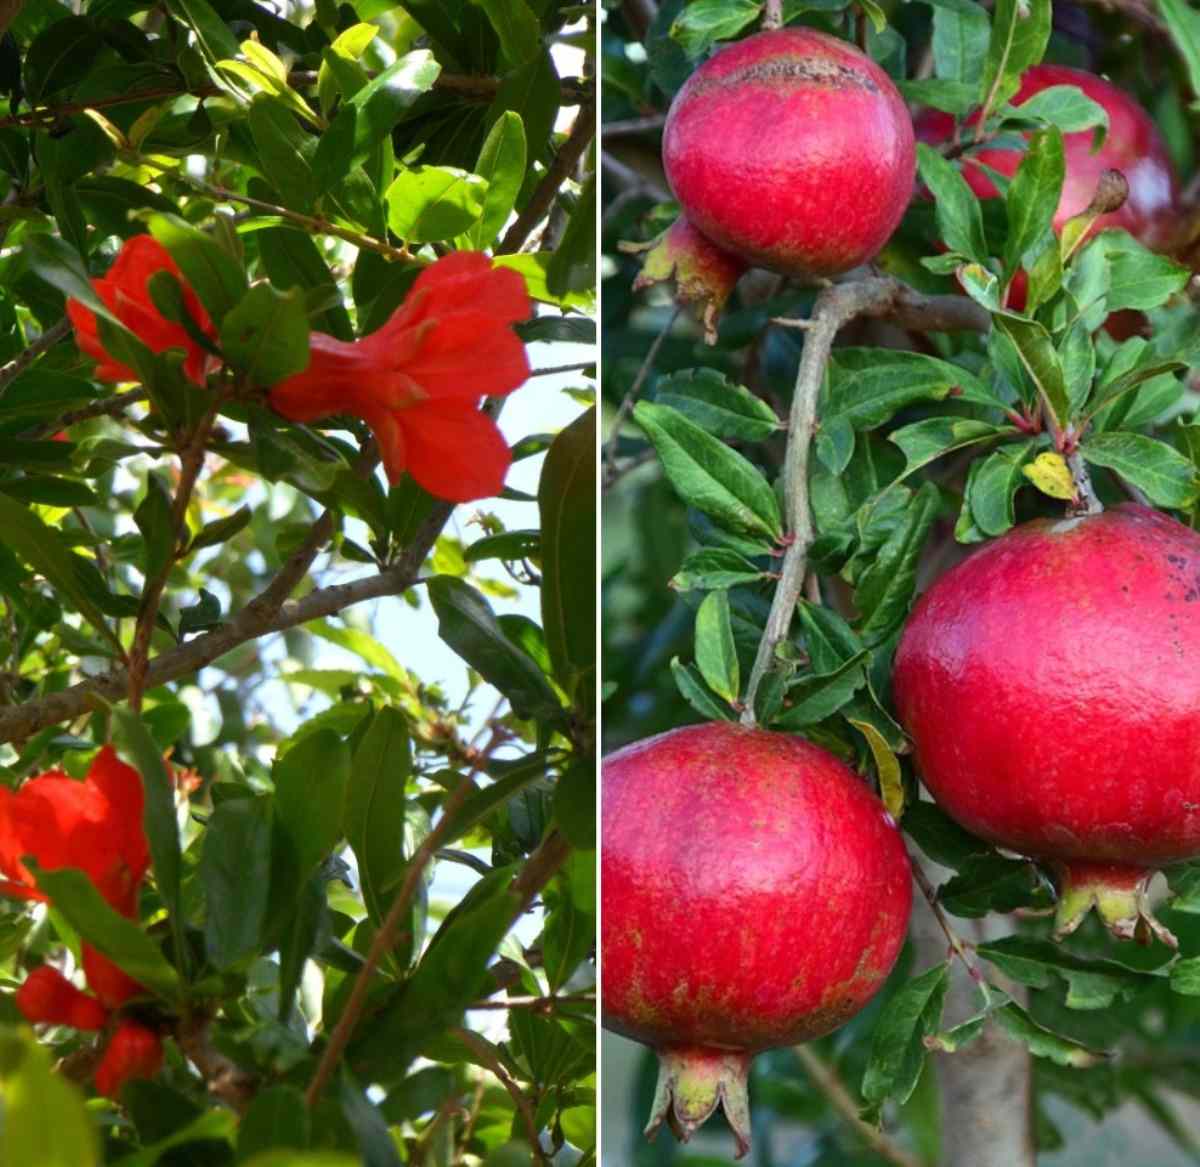 Water requirement for Pomegranate plant.